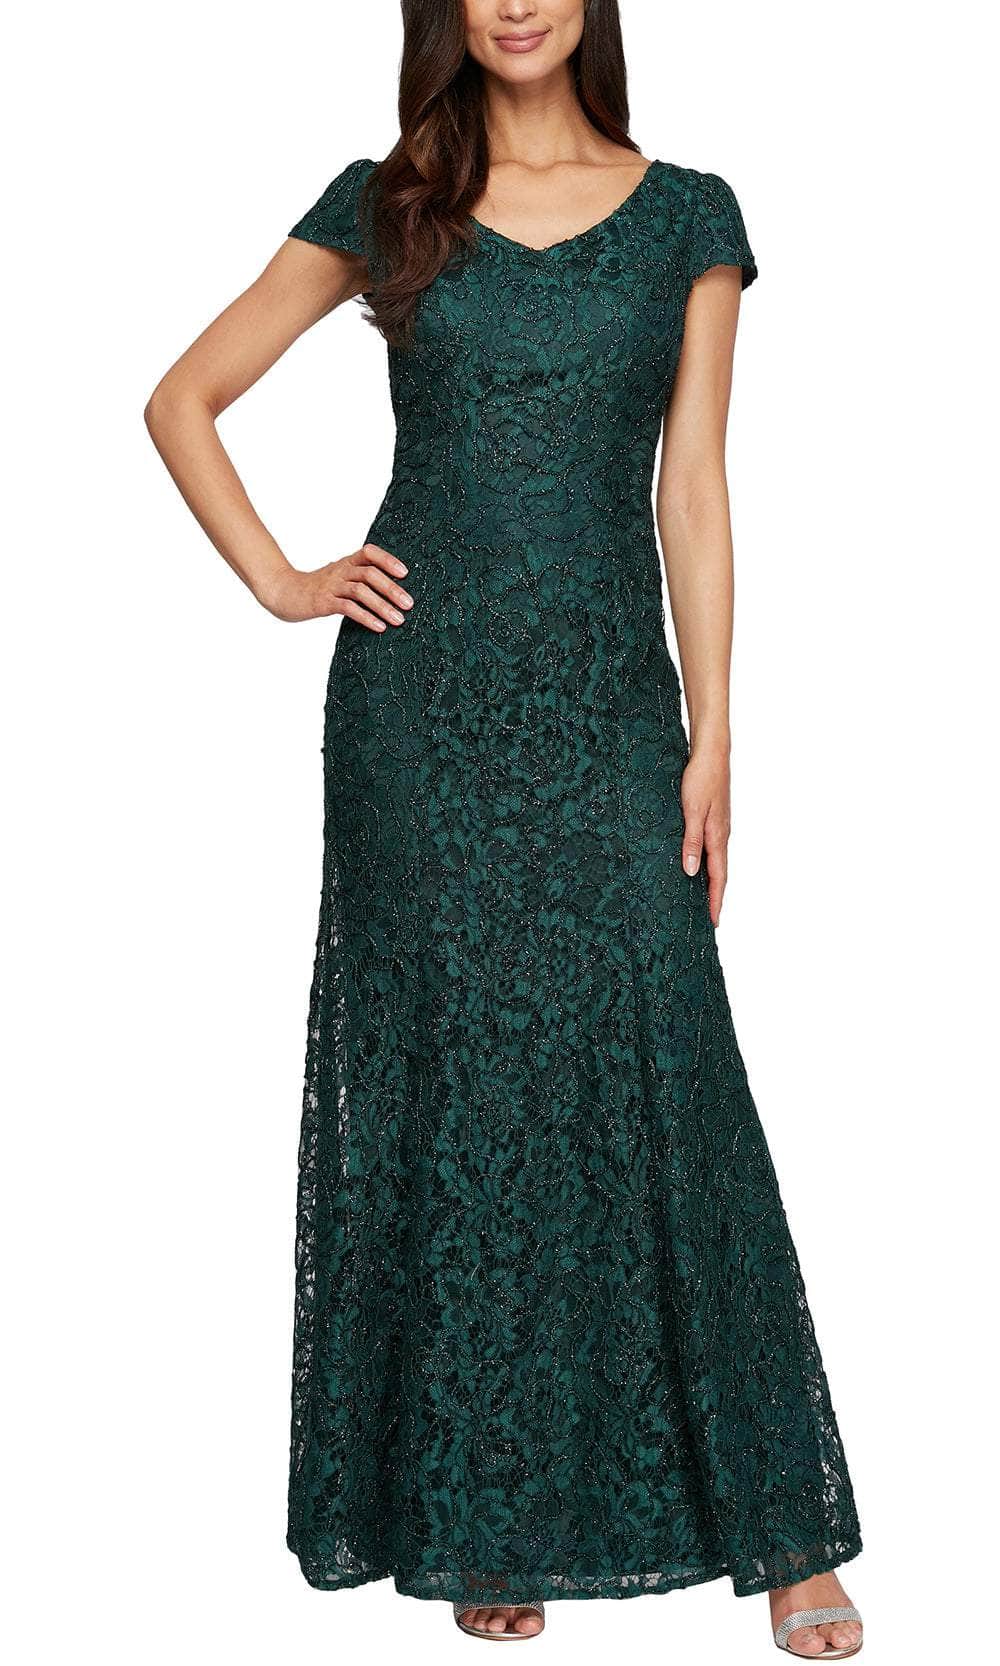 Image of Alex Evenings 811223231 - Corded Lace Evening Dress